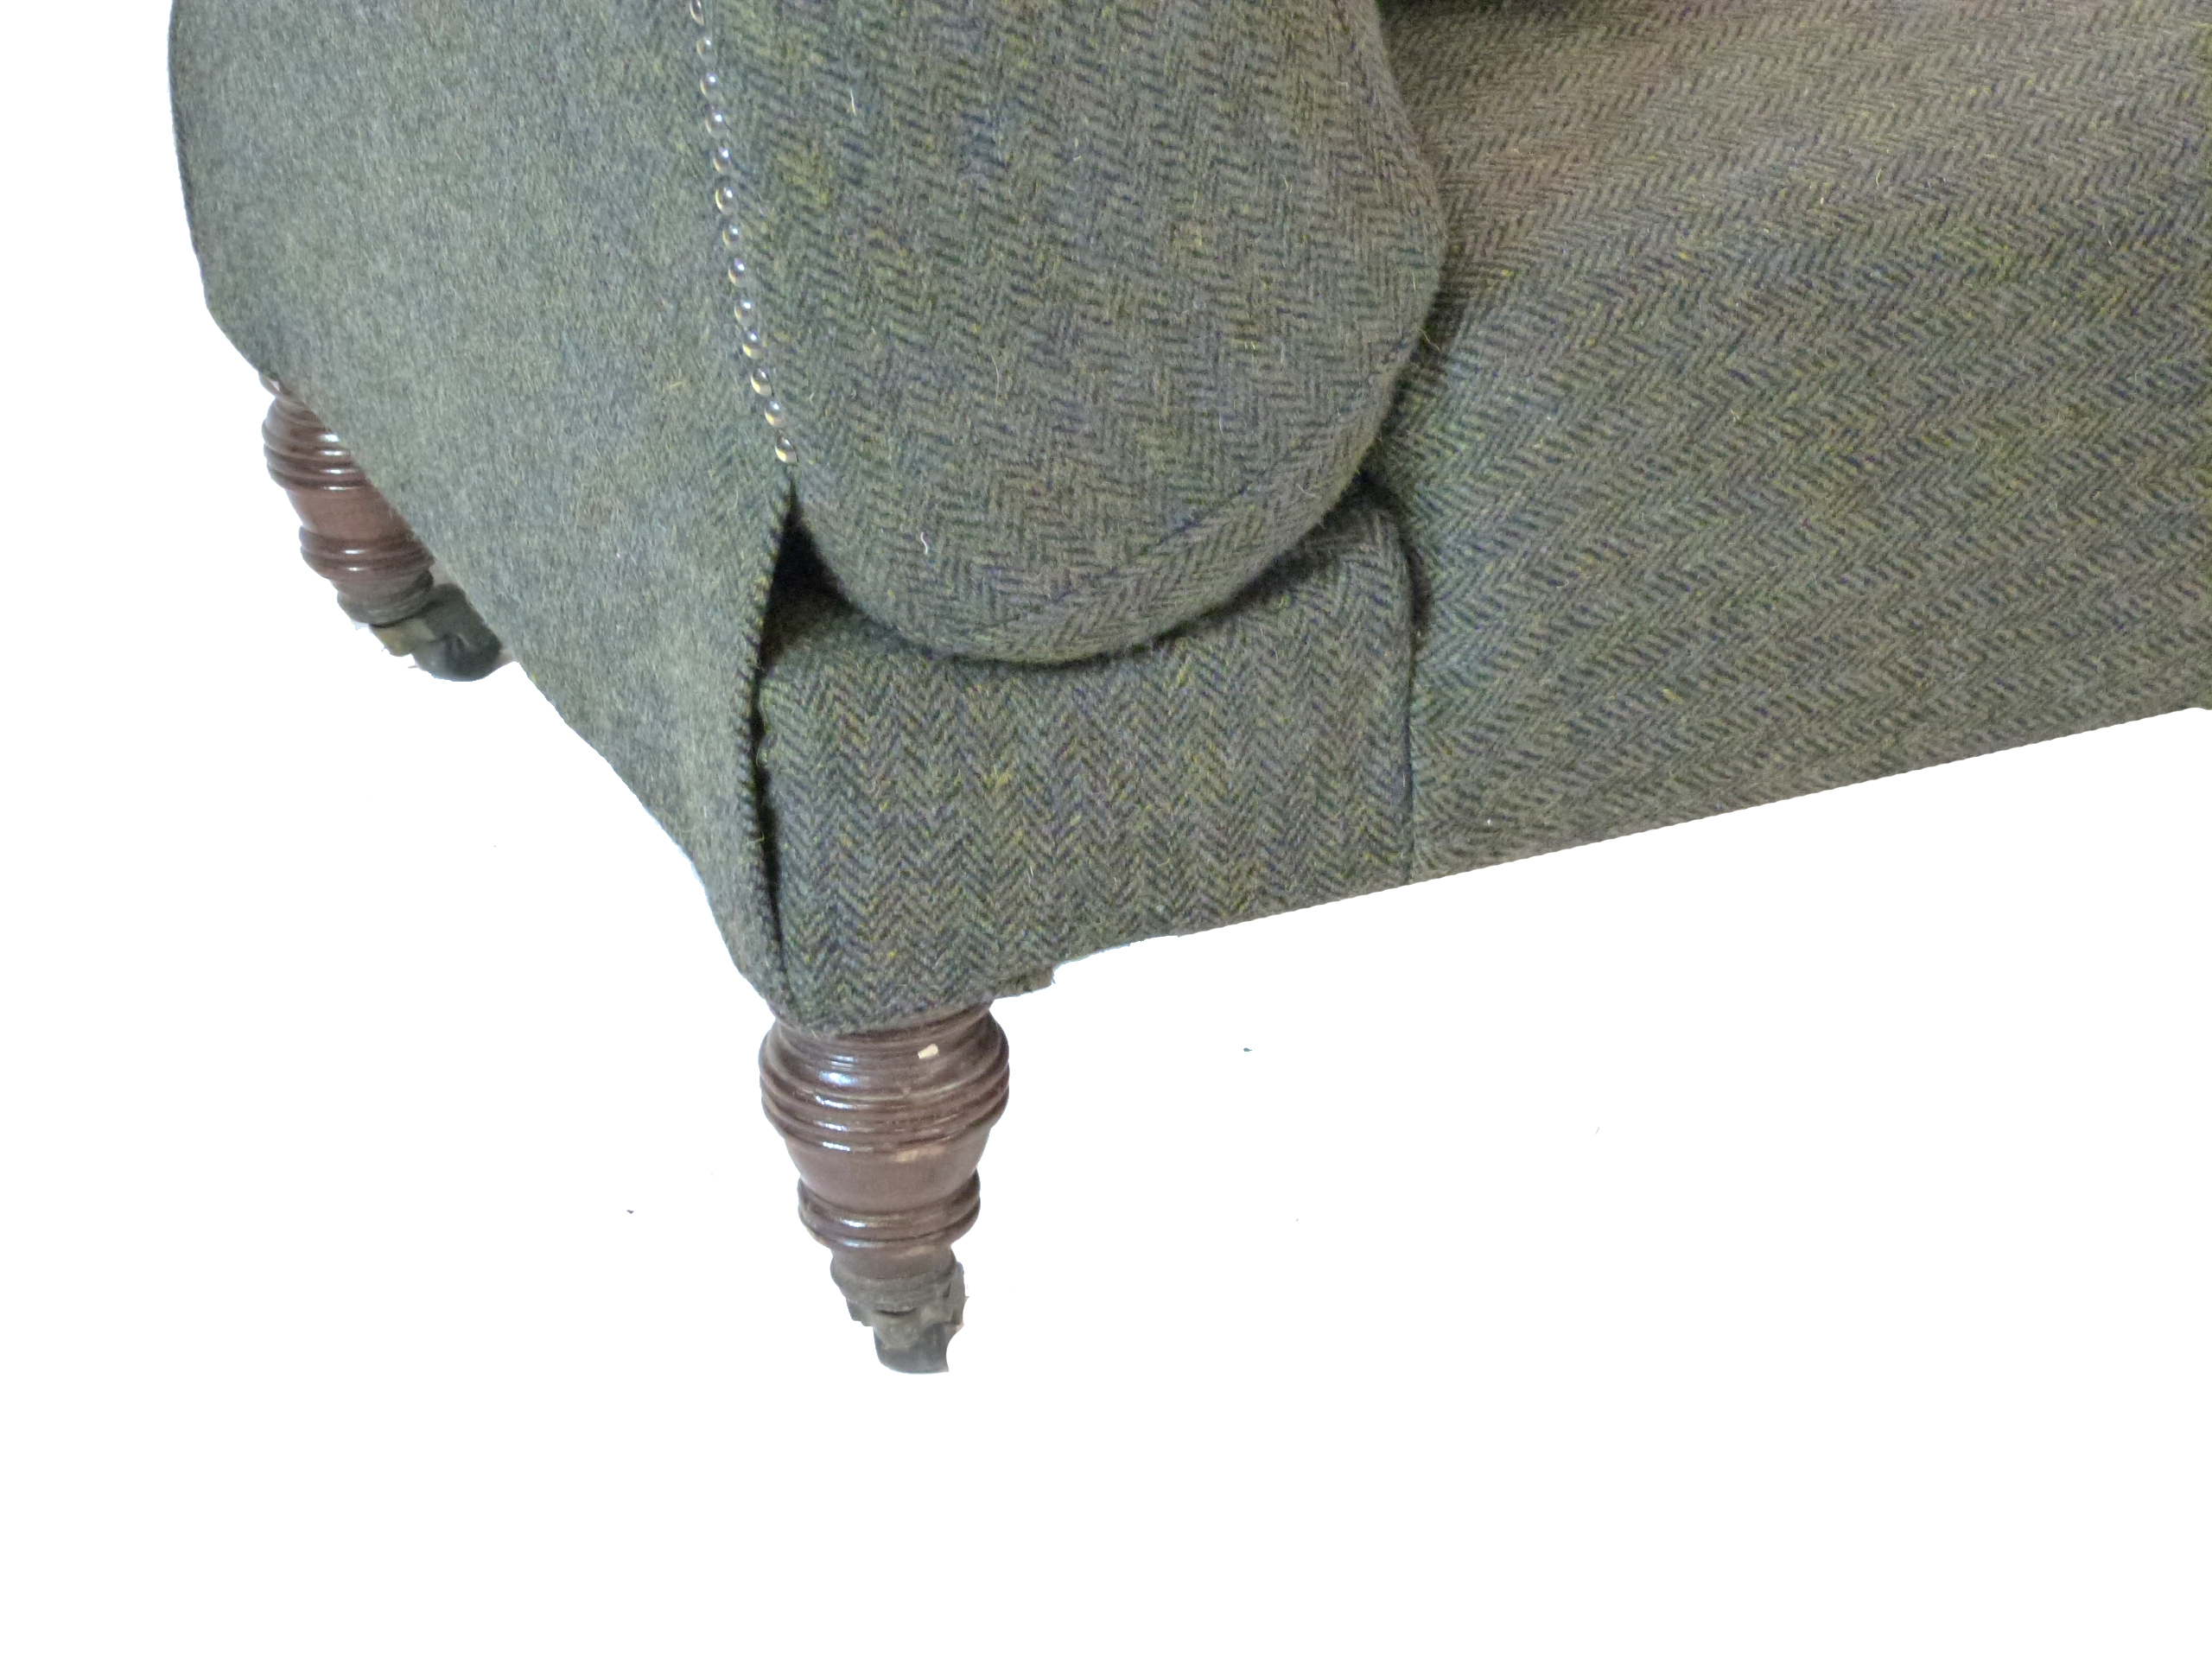 Victorian chaise longue with adjustable backrest, recently re-upholstered in dark Harris tweed - Image 4 of 6